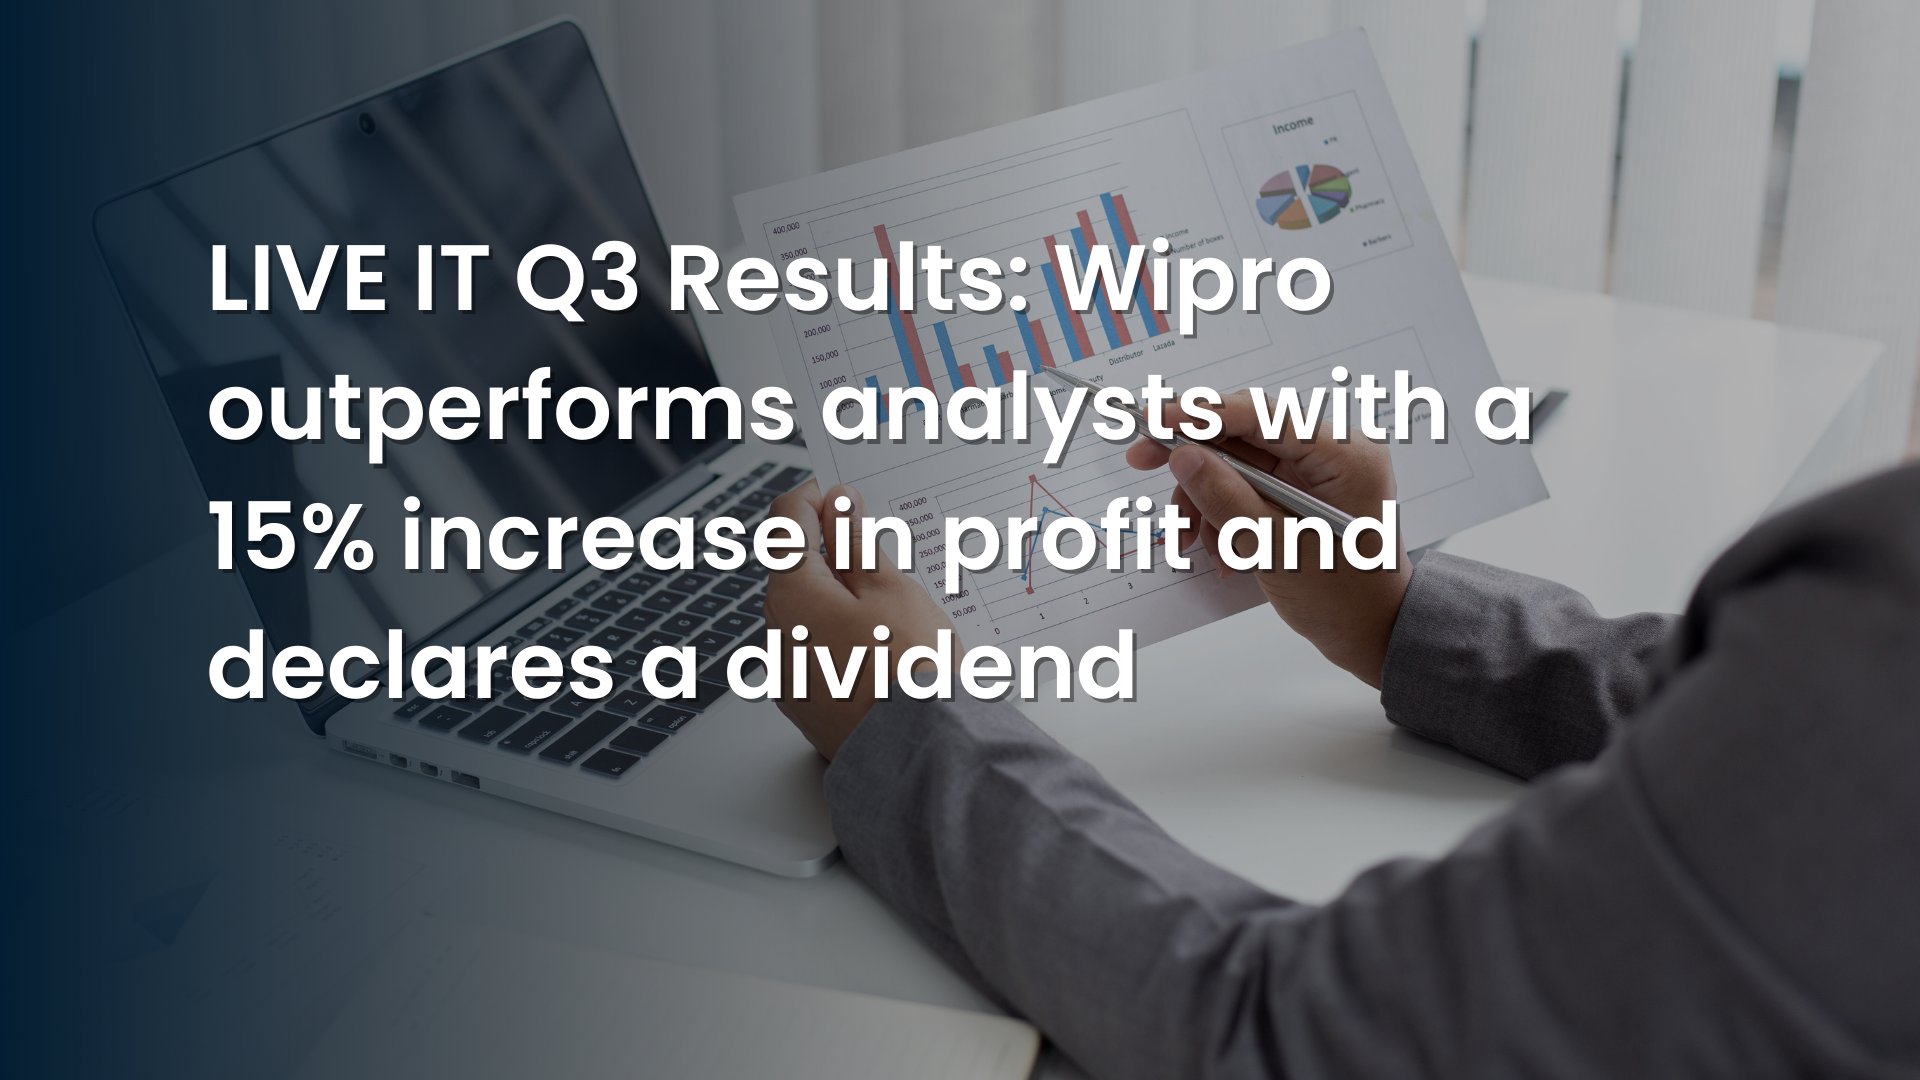 LIVE IT Q3 Results: Wipro Outperforms Analysts With A 15% Increase In Profit And Declares A Dividend